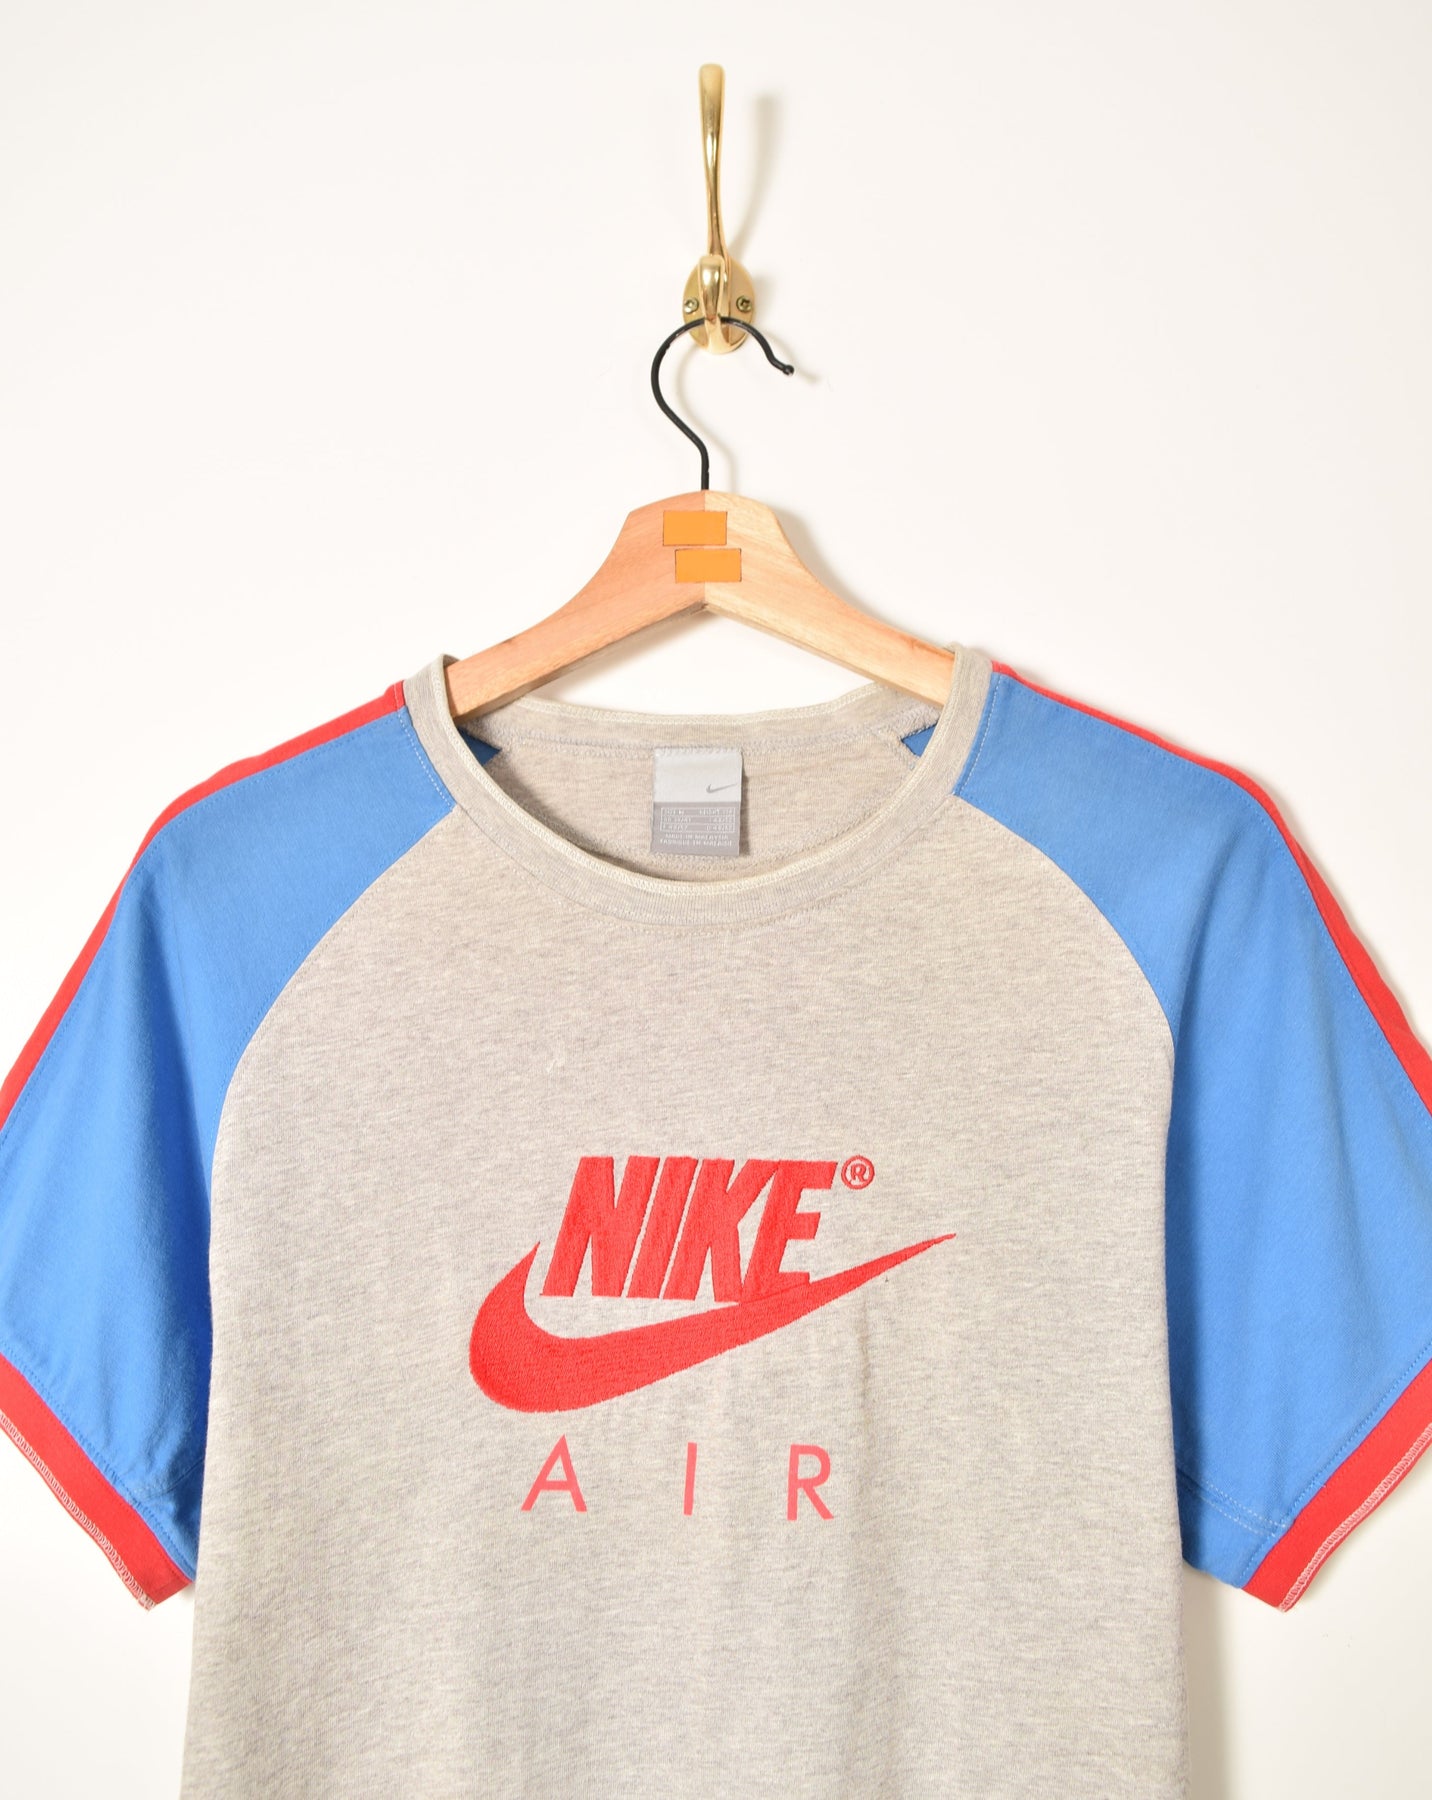 Nike Vintage T-Shirt – FROM THE